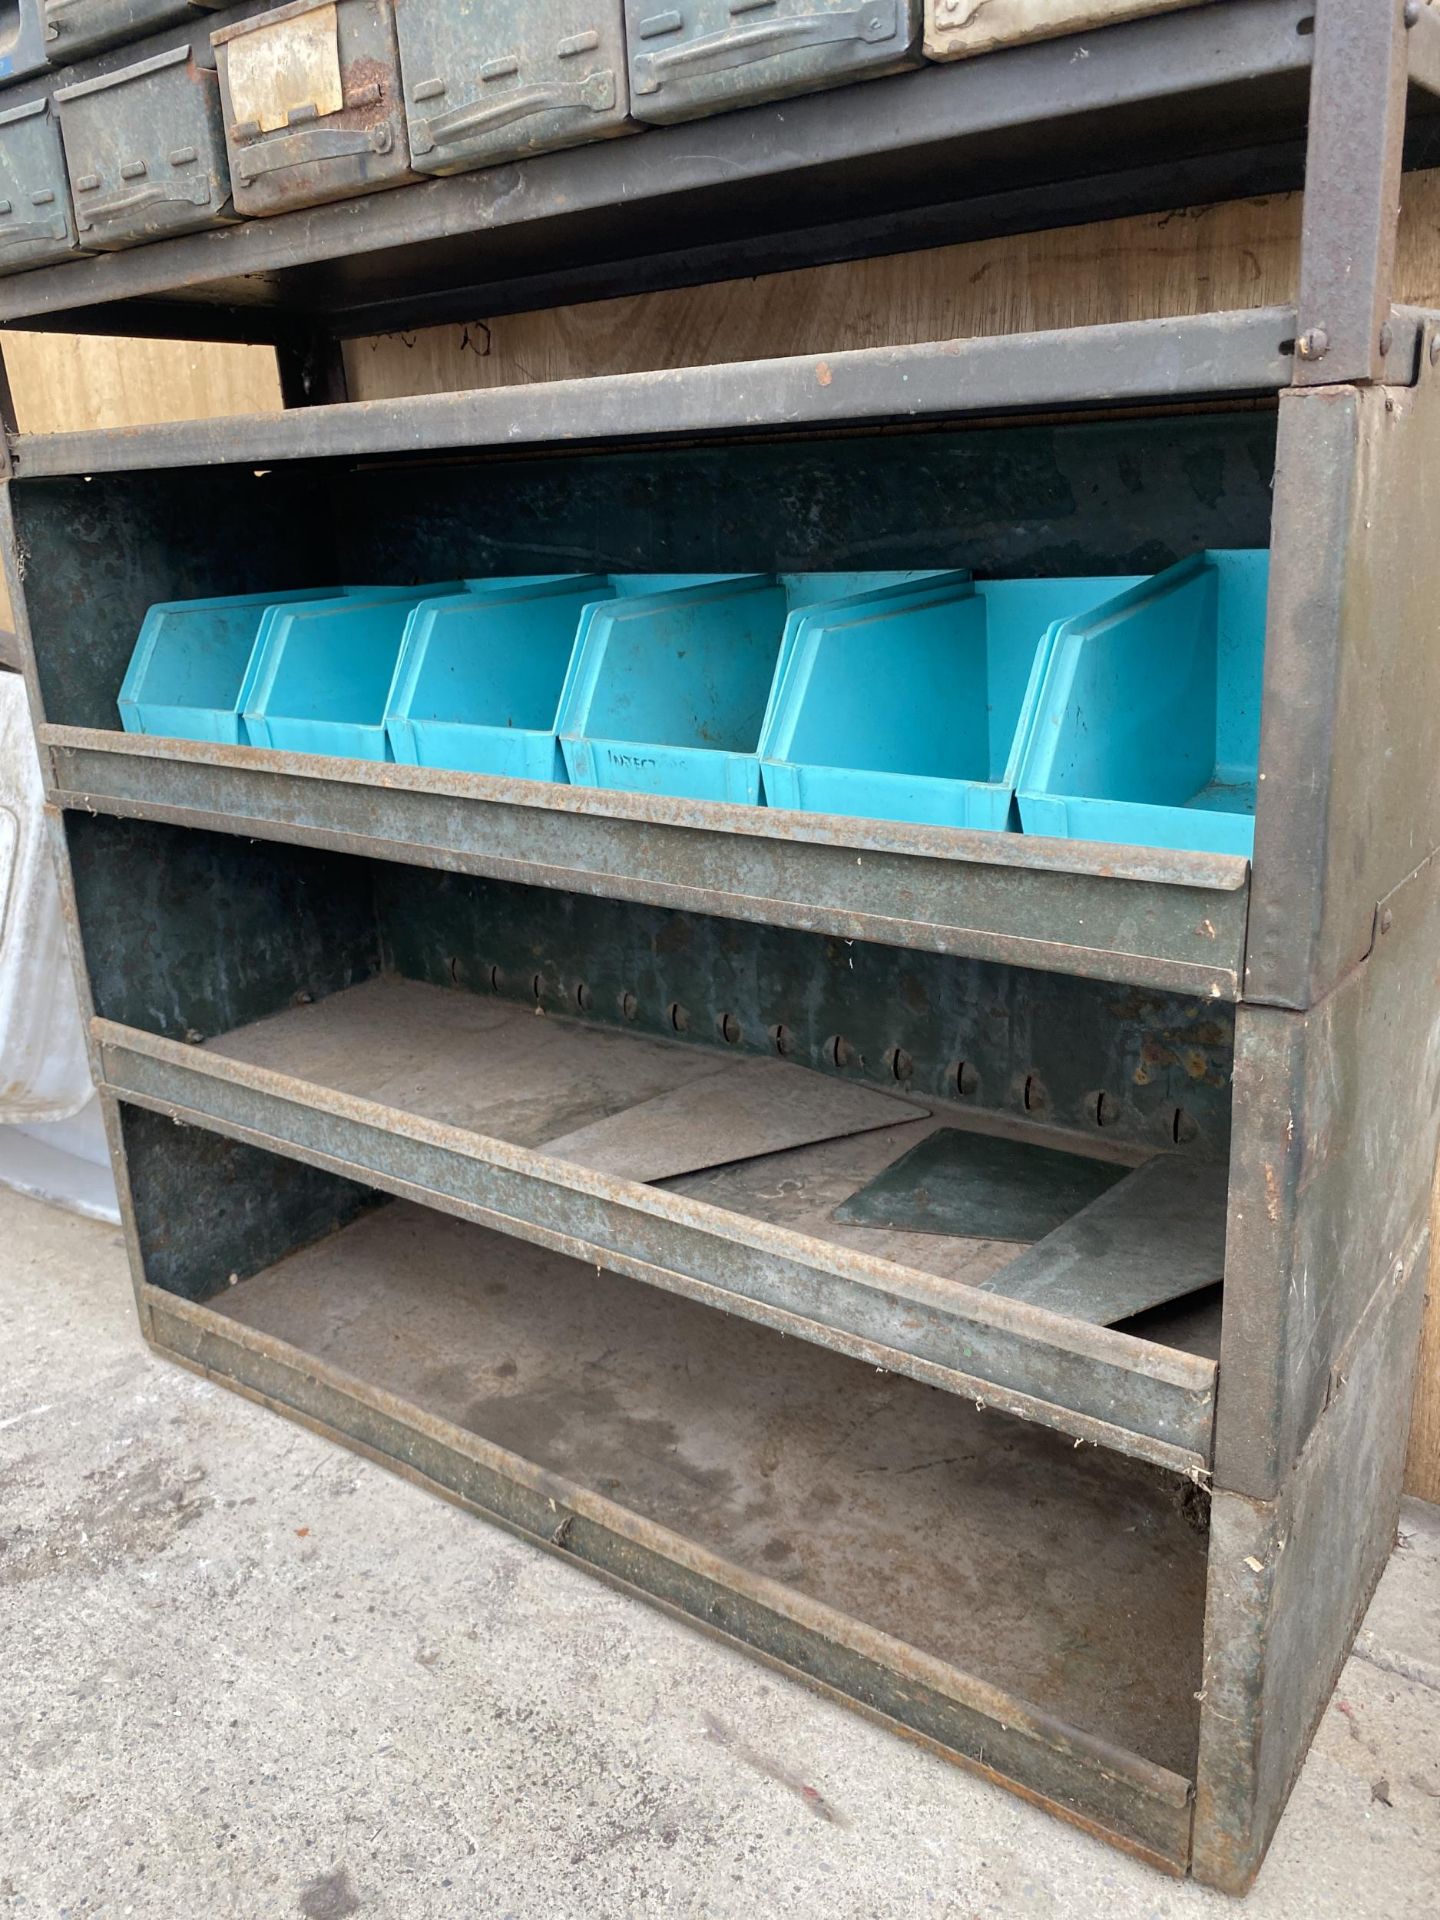 A VINTAGE TOOL STORAGE UNIT WITH UPPER INDIVIDUAL TRAY DRAWERS AND LOWER SHELVES - Bild 6 aus 6